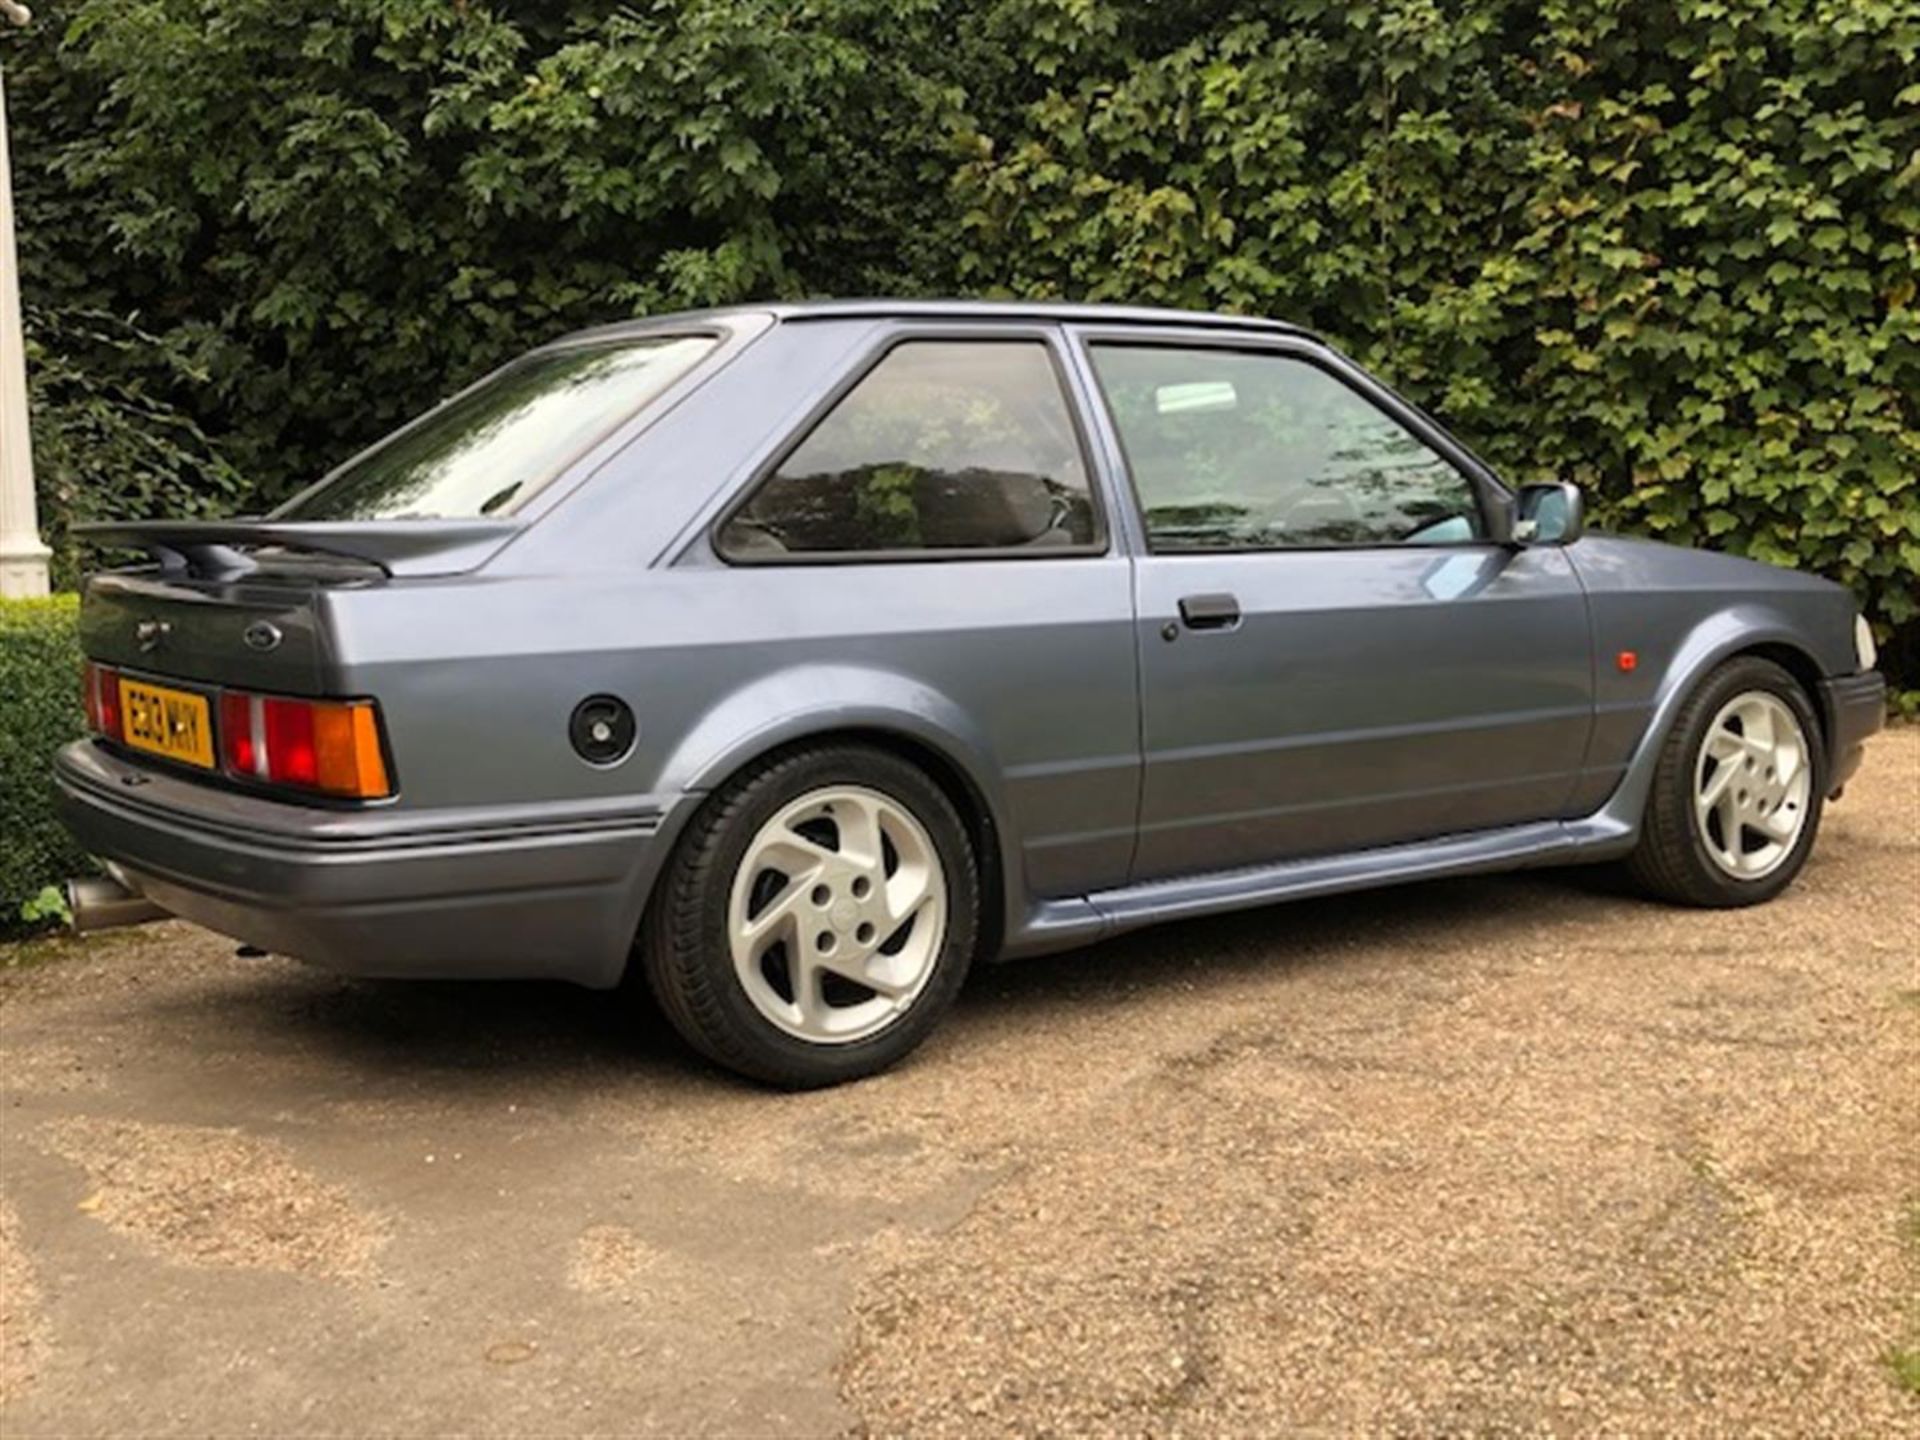 1988 Ford Escort RS Turbo - Image 19 of 21